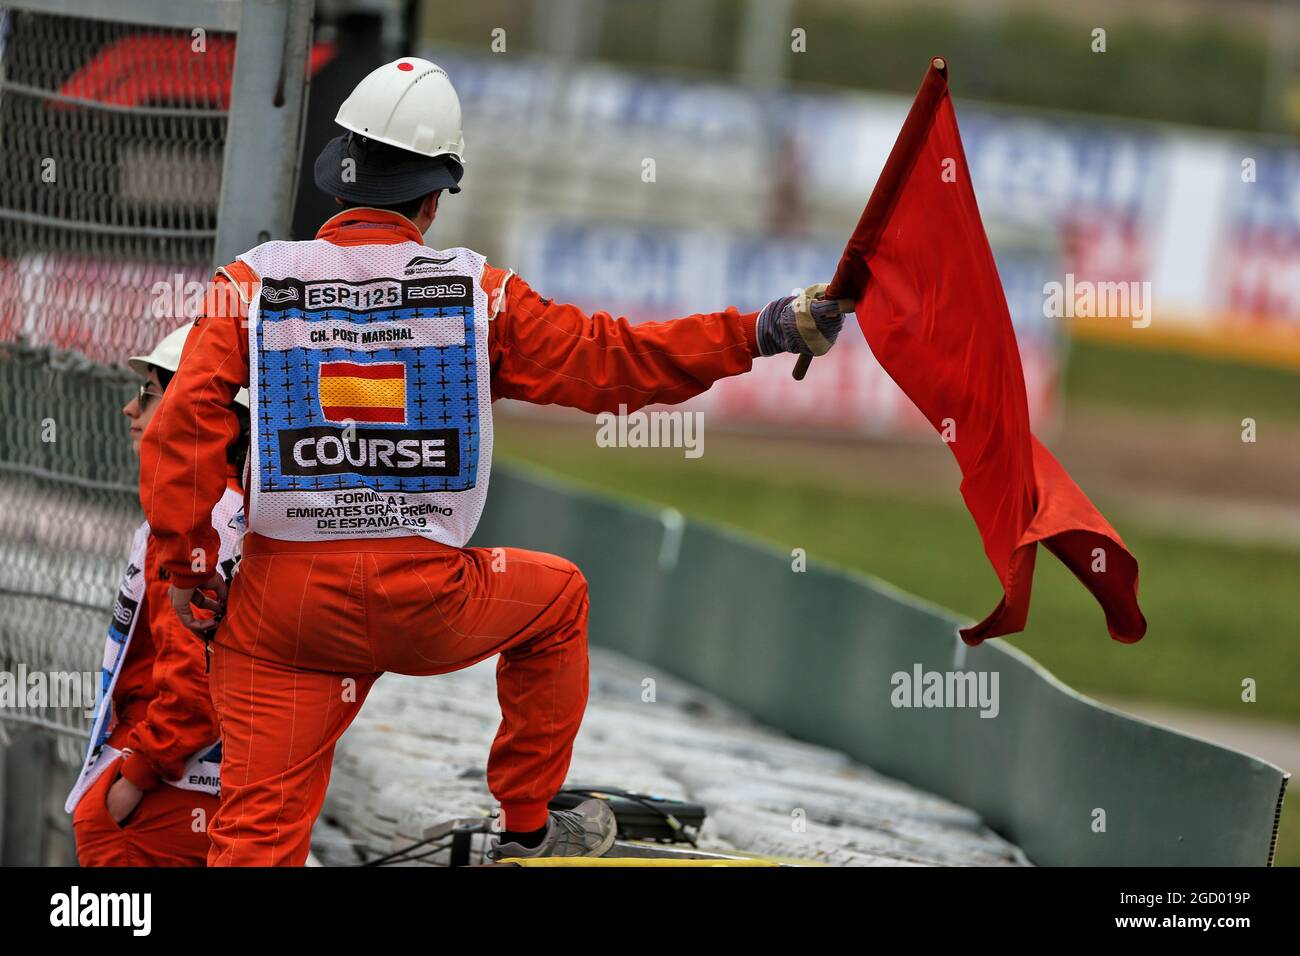 A marshal waves the red flag as the session is stopped. Spanish Grand Prix, Saturday 11th May 2019. Barcelona, Spain. Stock Photo